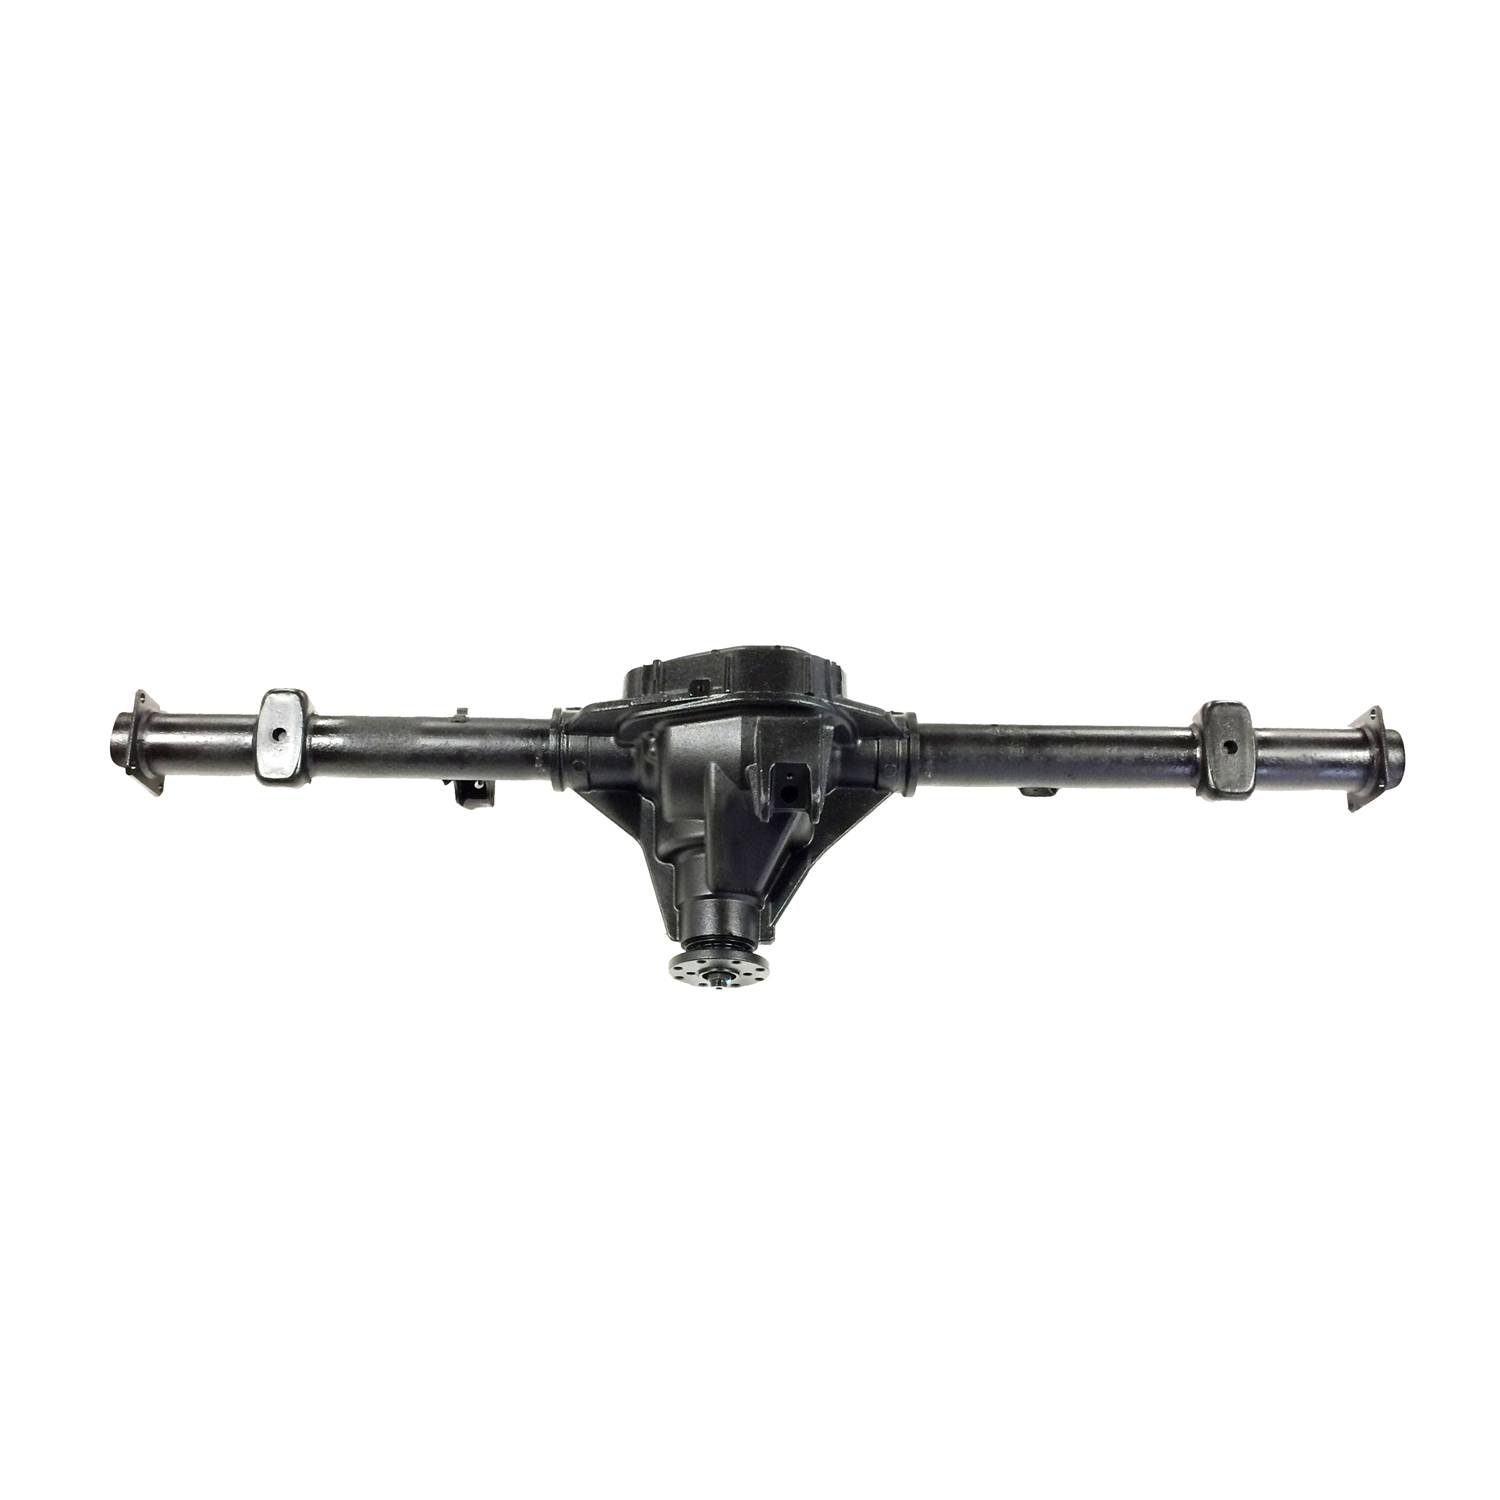 Reman Axle Assembly Ford 9.75" 04-05 Ford F150 3.73 Ratio, Disc Brakes